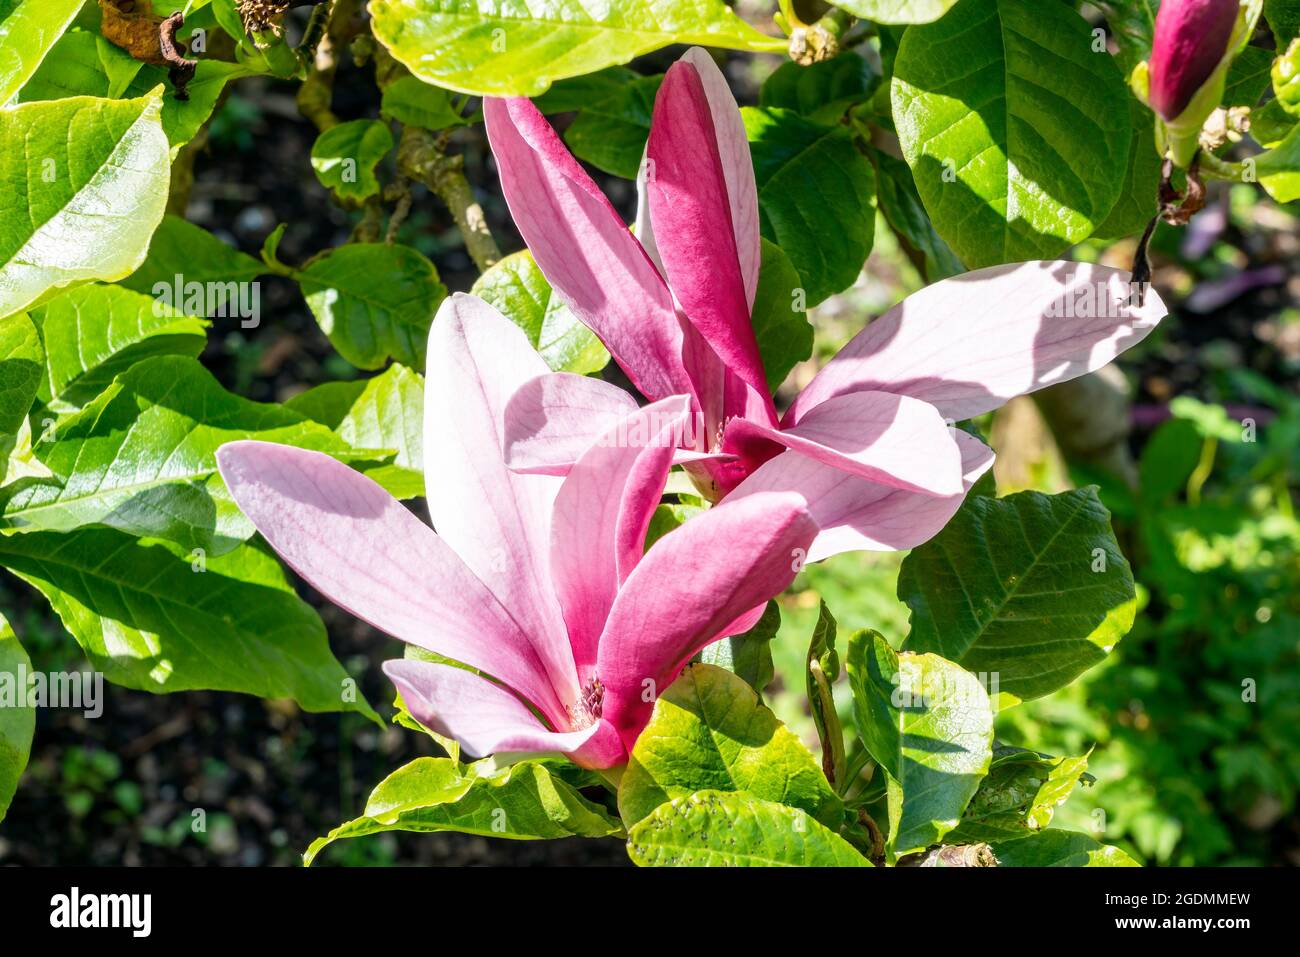 Magnolia Liliiflora 'Nigra' a summer flowering tree shrub plant with purple red summertime flower blossom commonly known as black lily magnolia, stock Stock Photo